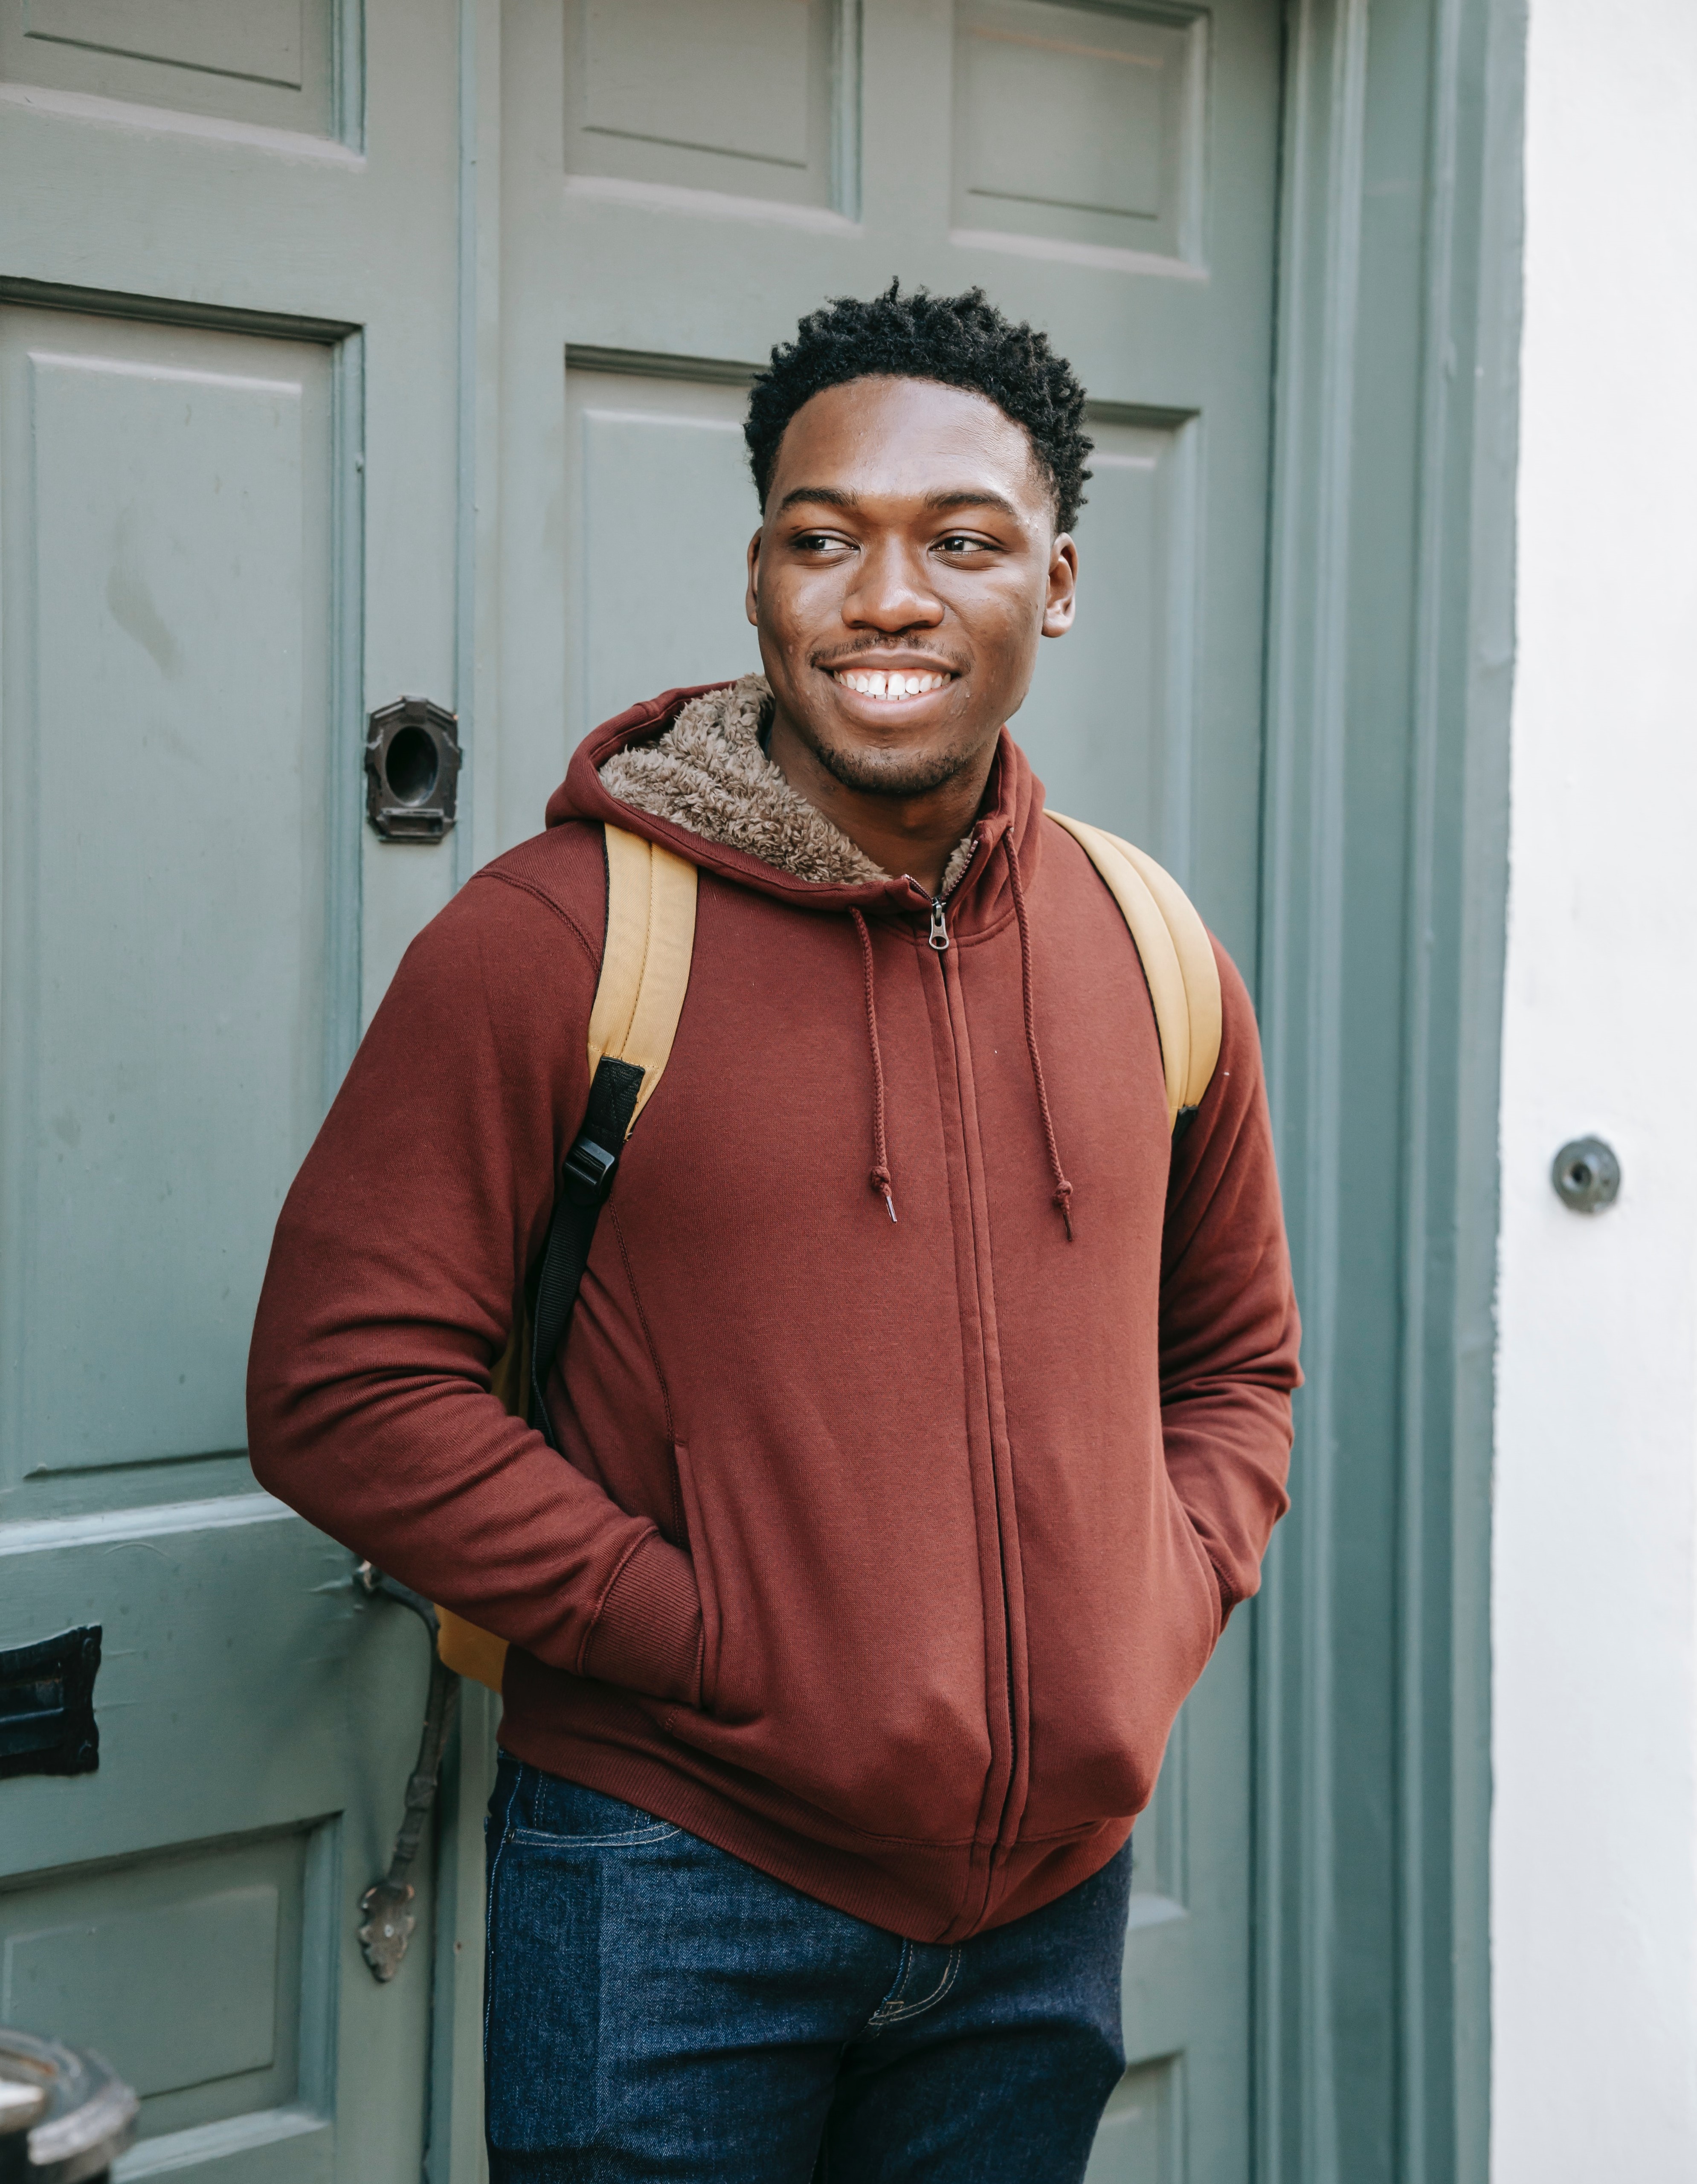 smiling young man stood in doorway wearing a back pack.